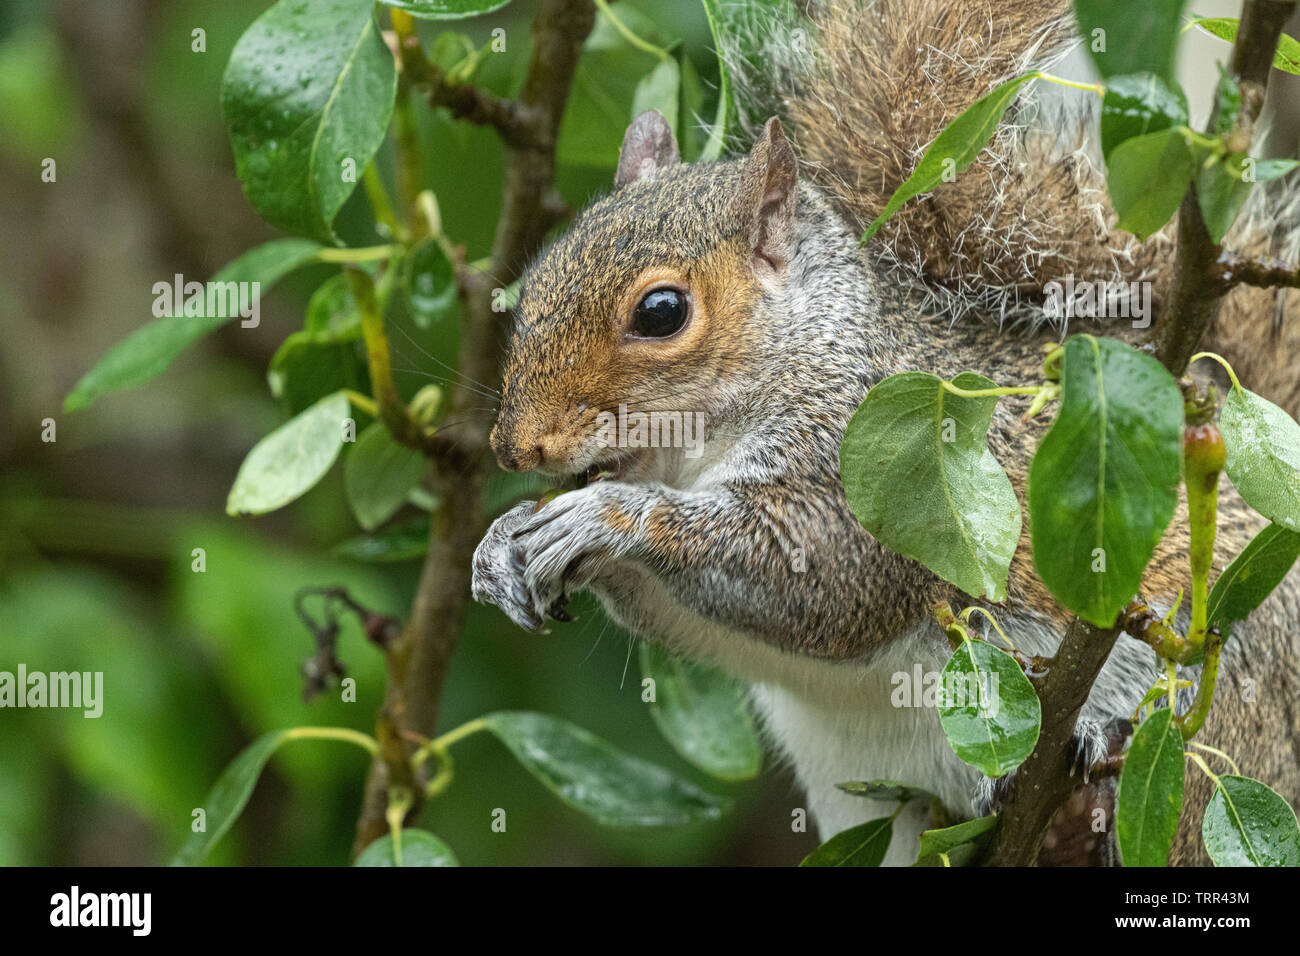 A grey squirrel n a tree eating very small, unripe pears. Stock Photo